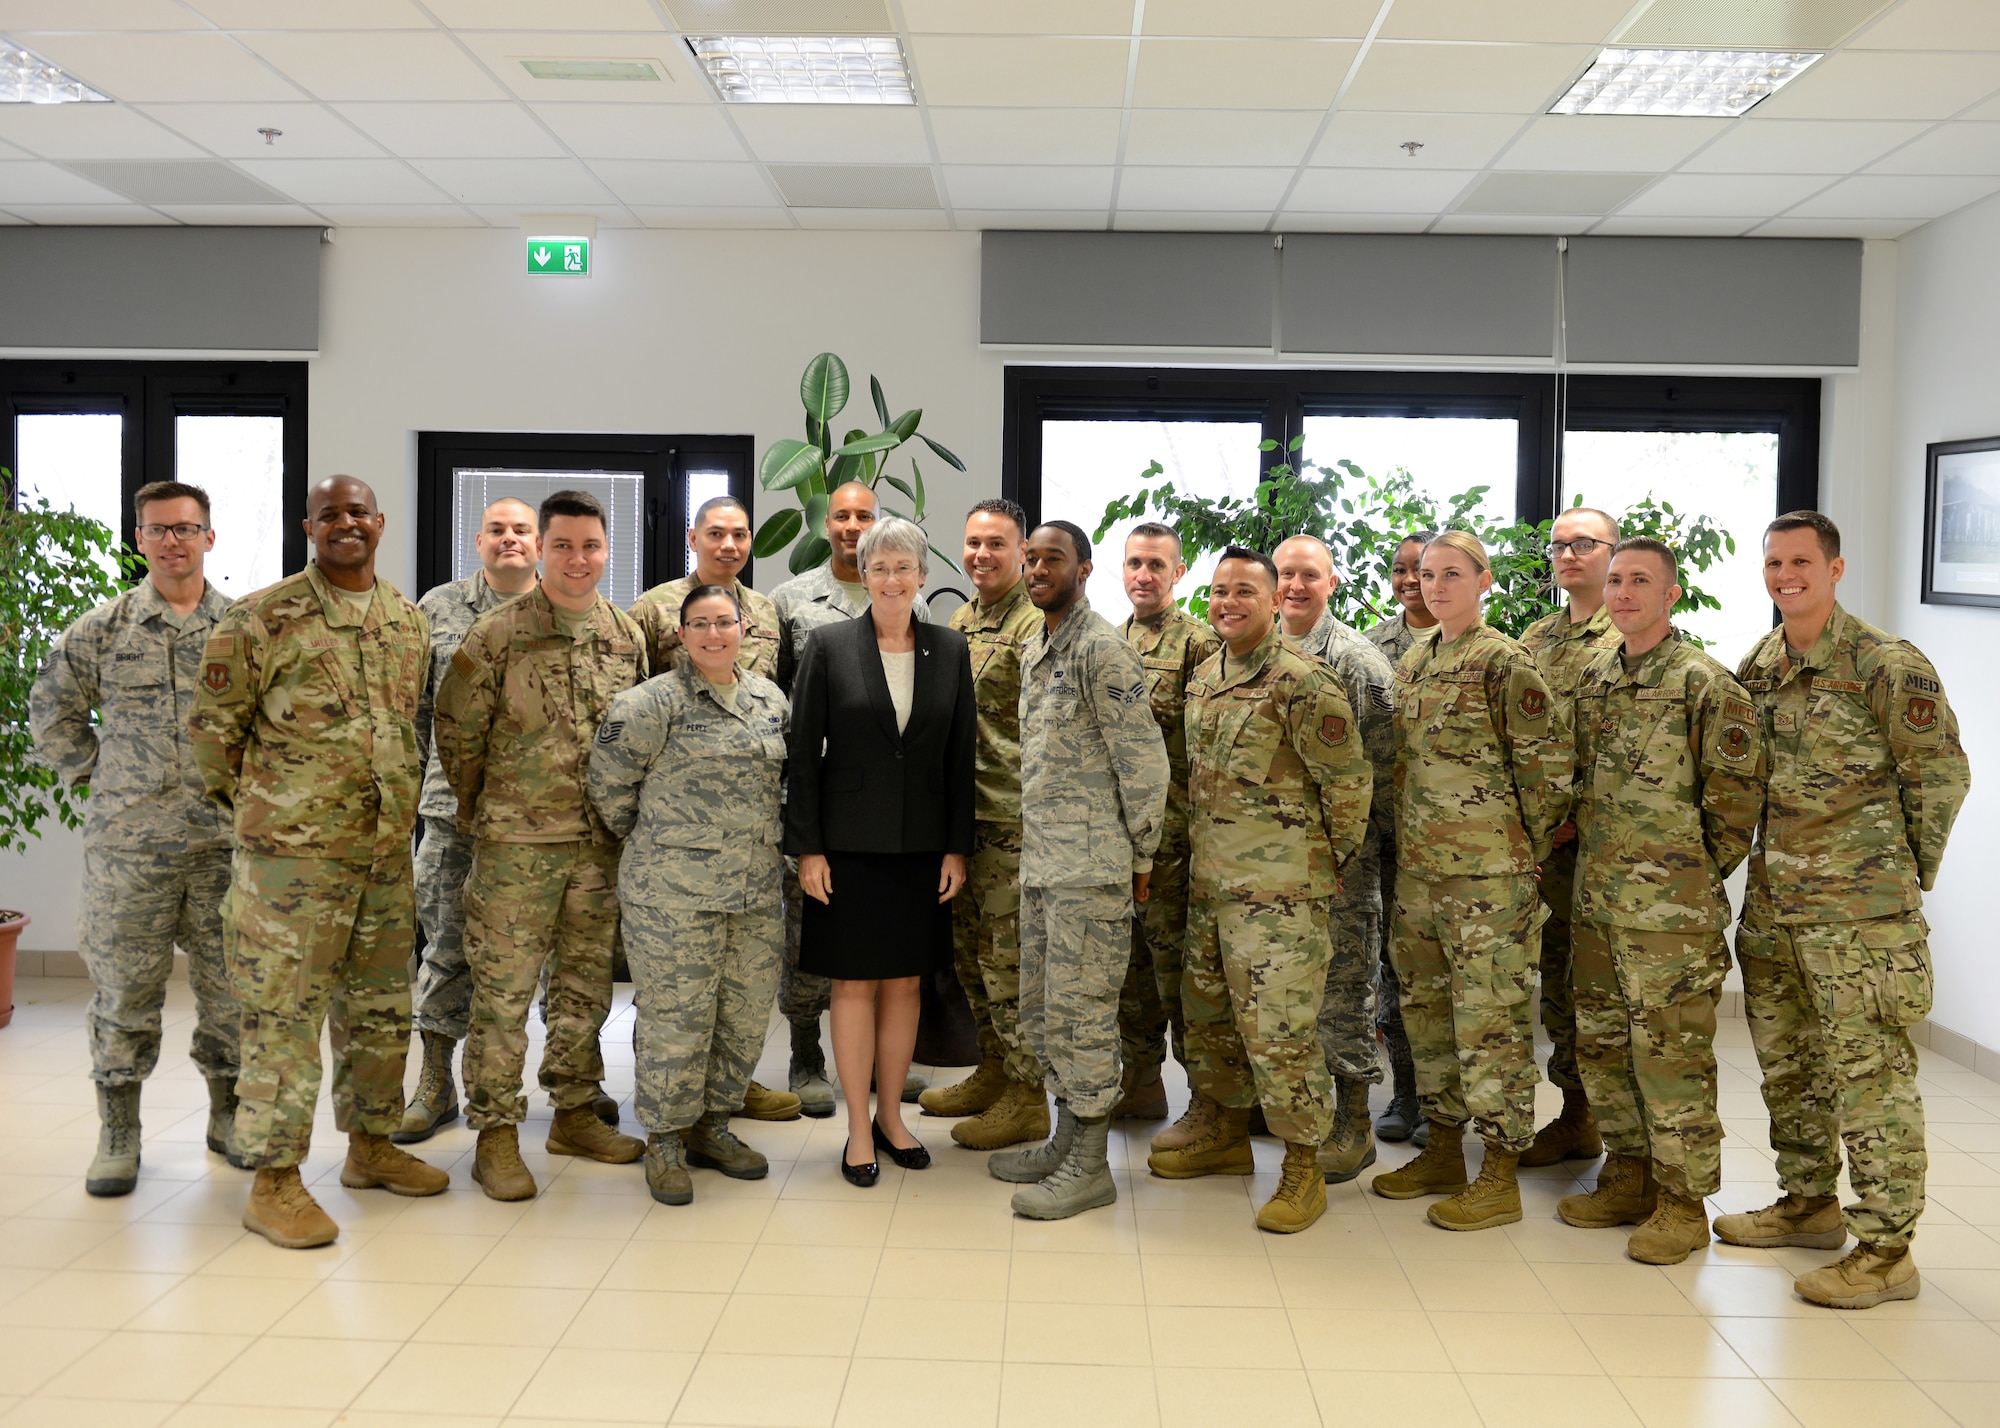 Secretary of the Air Force Heather Wilson visited with Wyvern Warriors at Aviano Air Base, Italy on April 24.